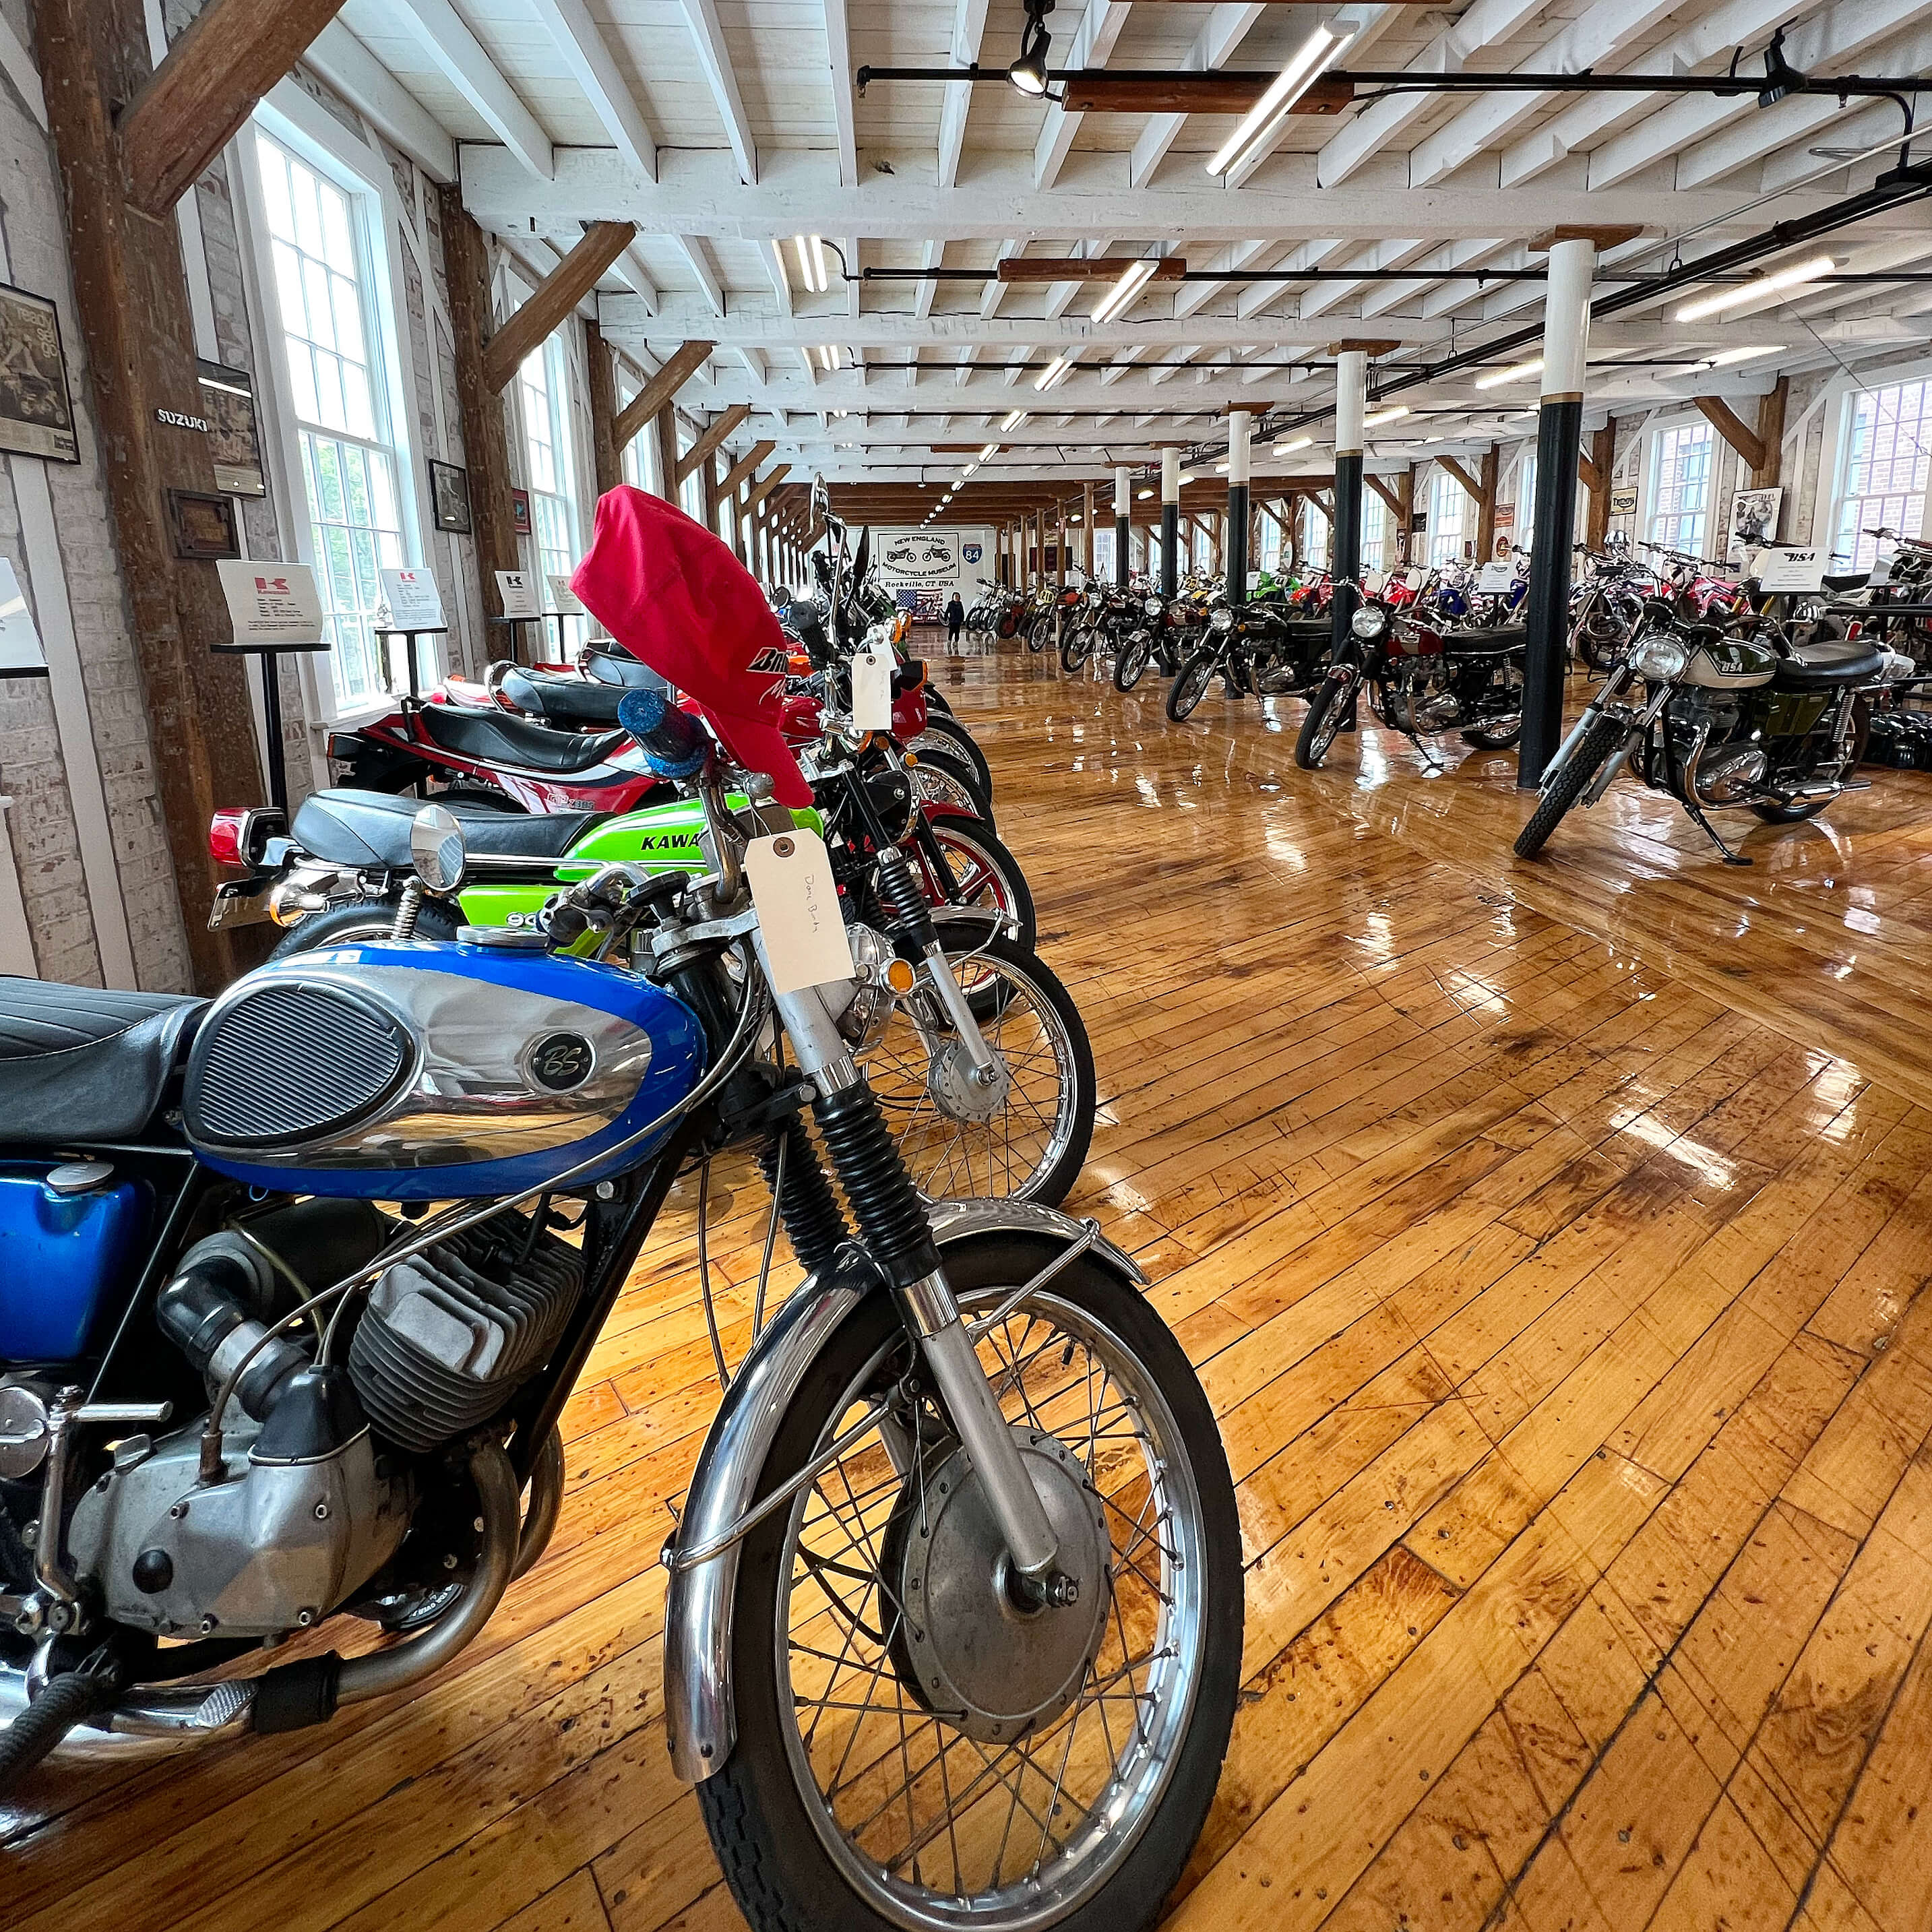 New England Motorcycle Museum